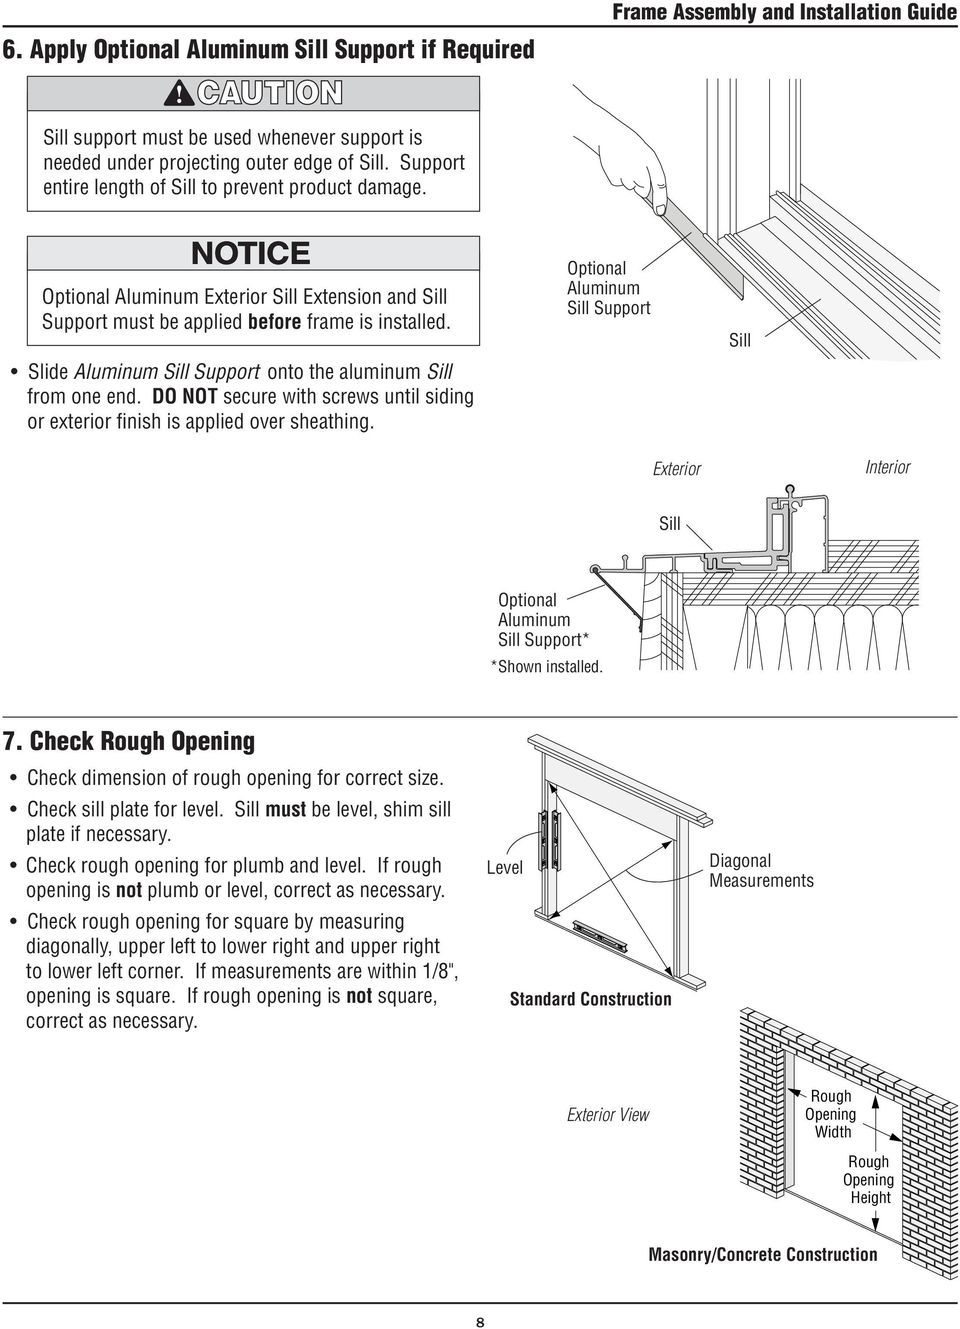 Slide Aluminum Sill Support onto the aluminum Sill from one end. DO NOT secure with screws until siding or exterior finish is applied over sheathing.